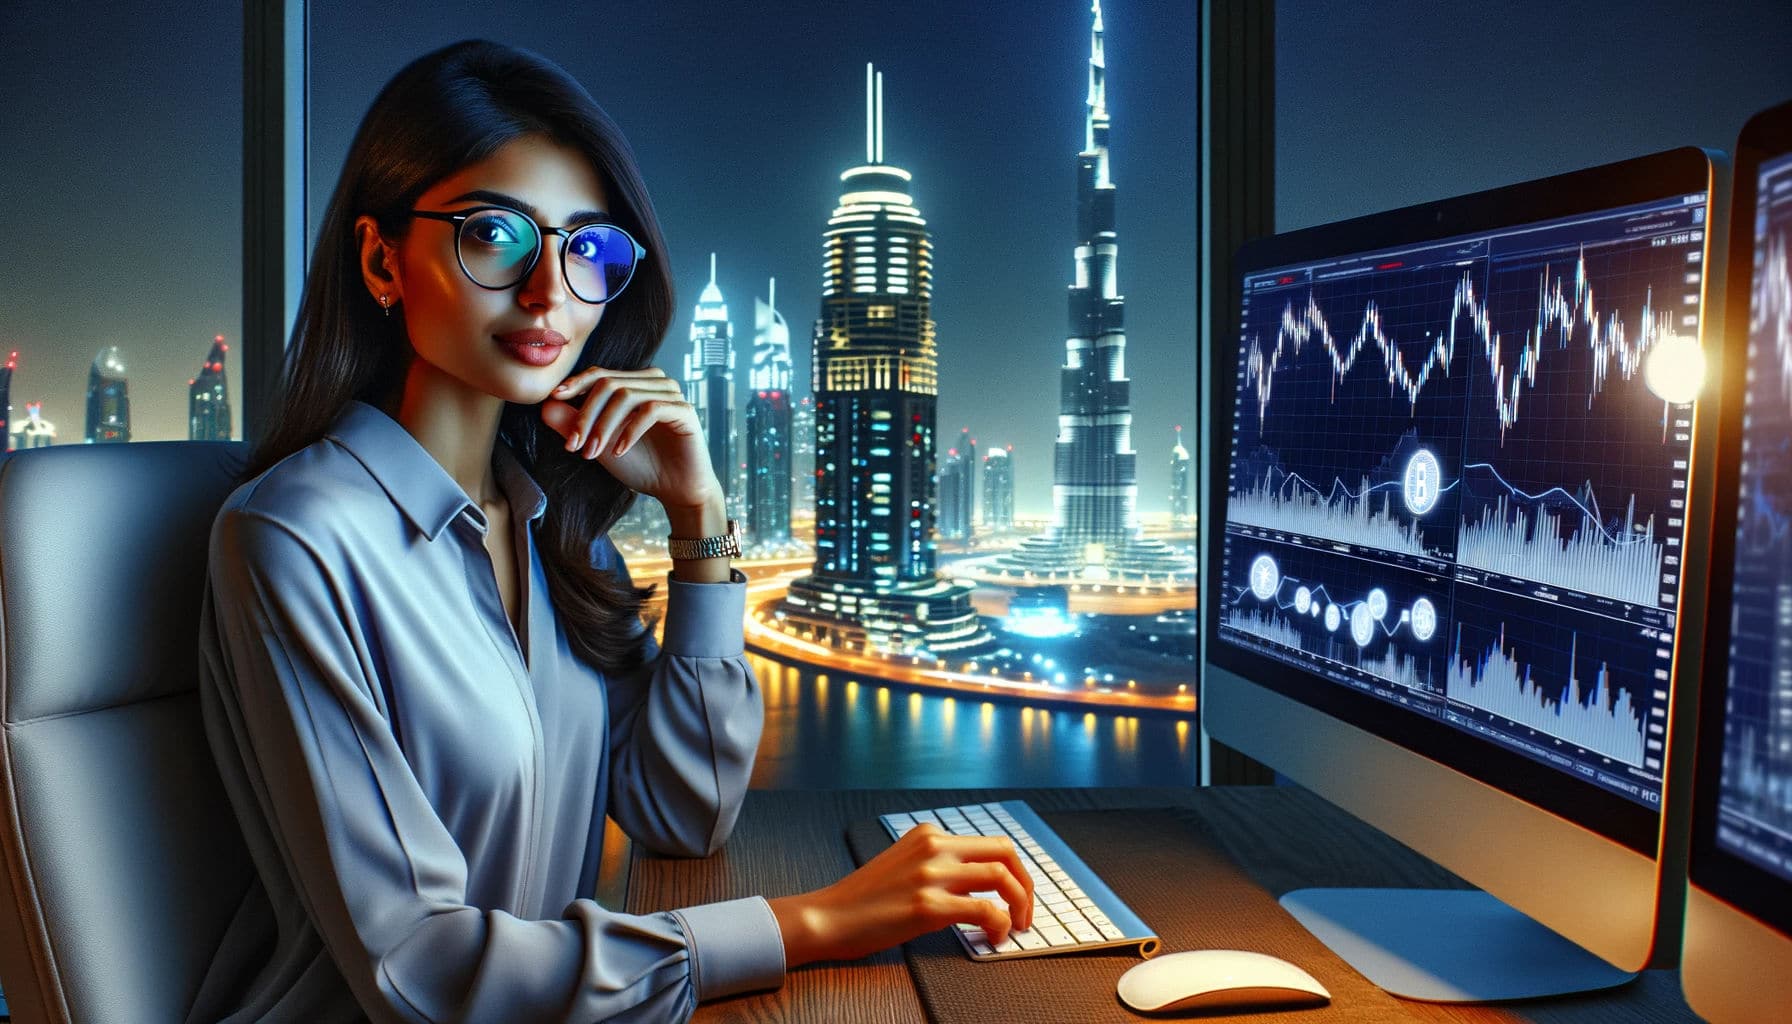 A female data analyst sitting at her desk with the backdrop of a night city skyline.